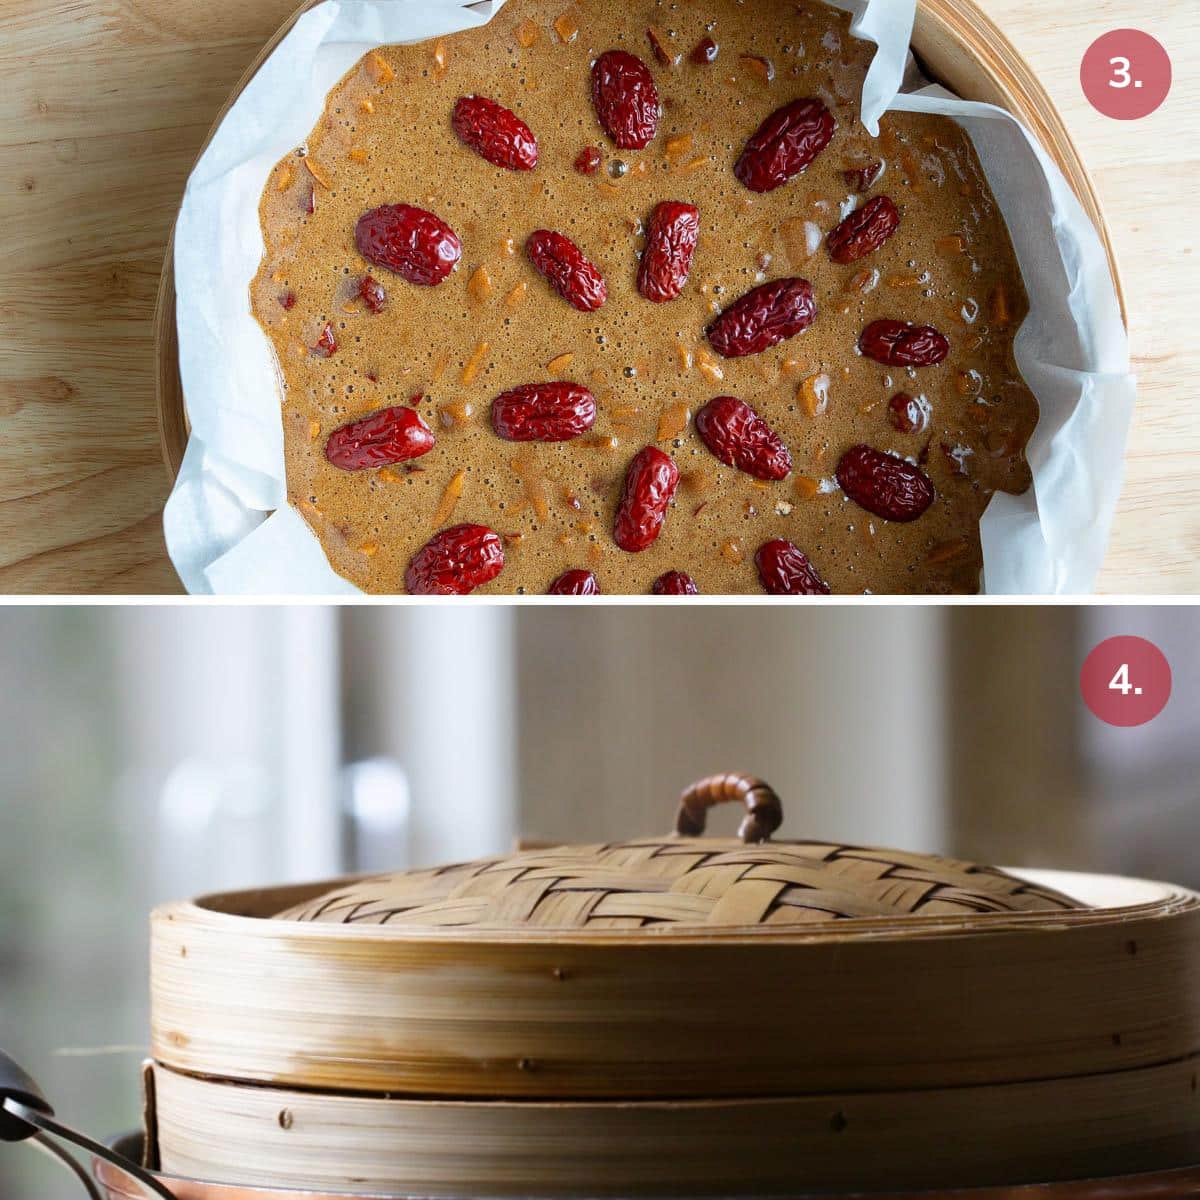 Garnish the gingerbread with red dates and steaming in bamboo basket. 